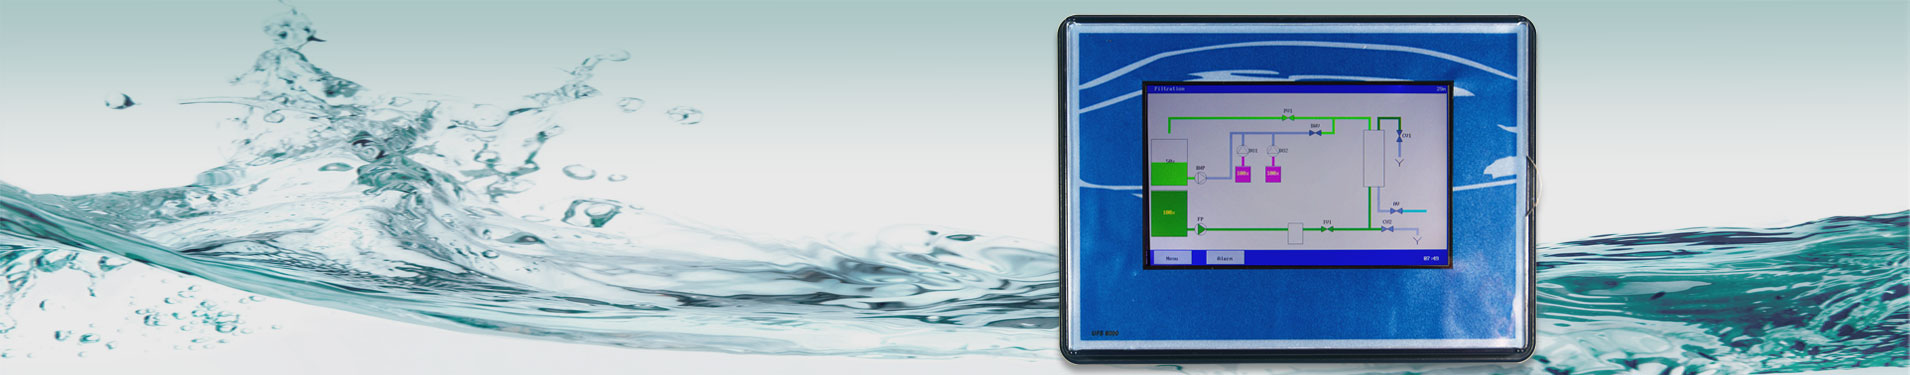 E.W.S. presents a new ultrafiltration water treatment controller: UFS8000